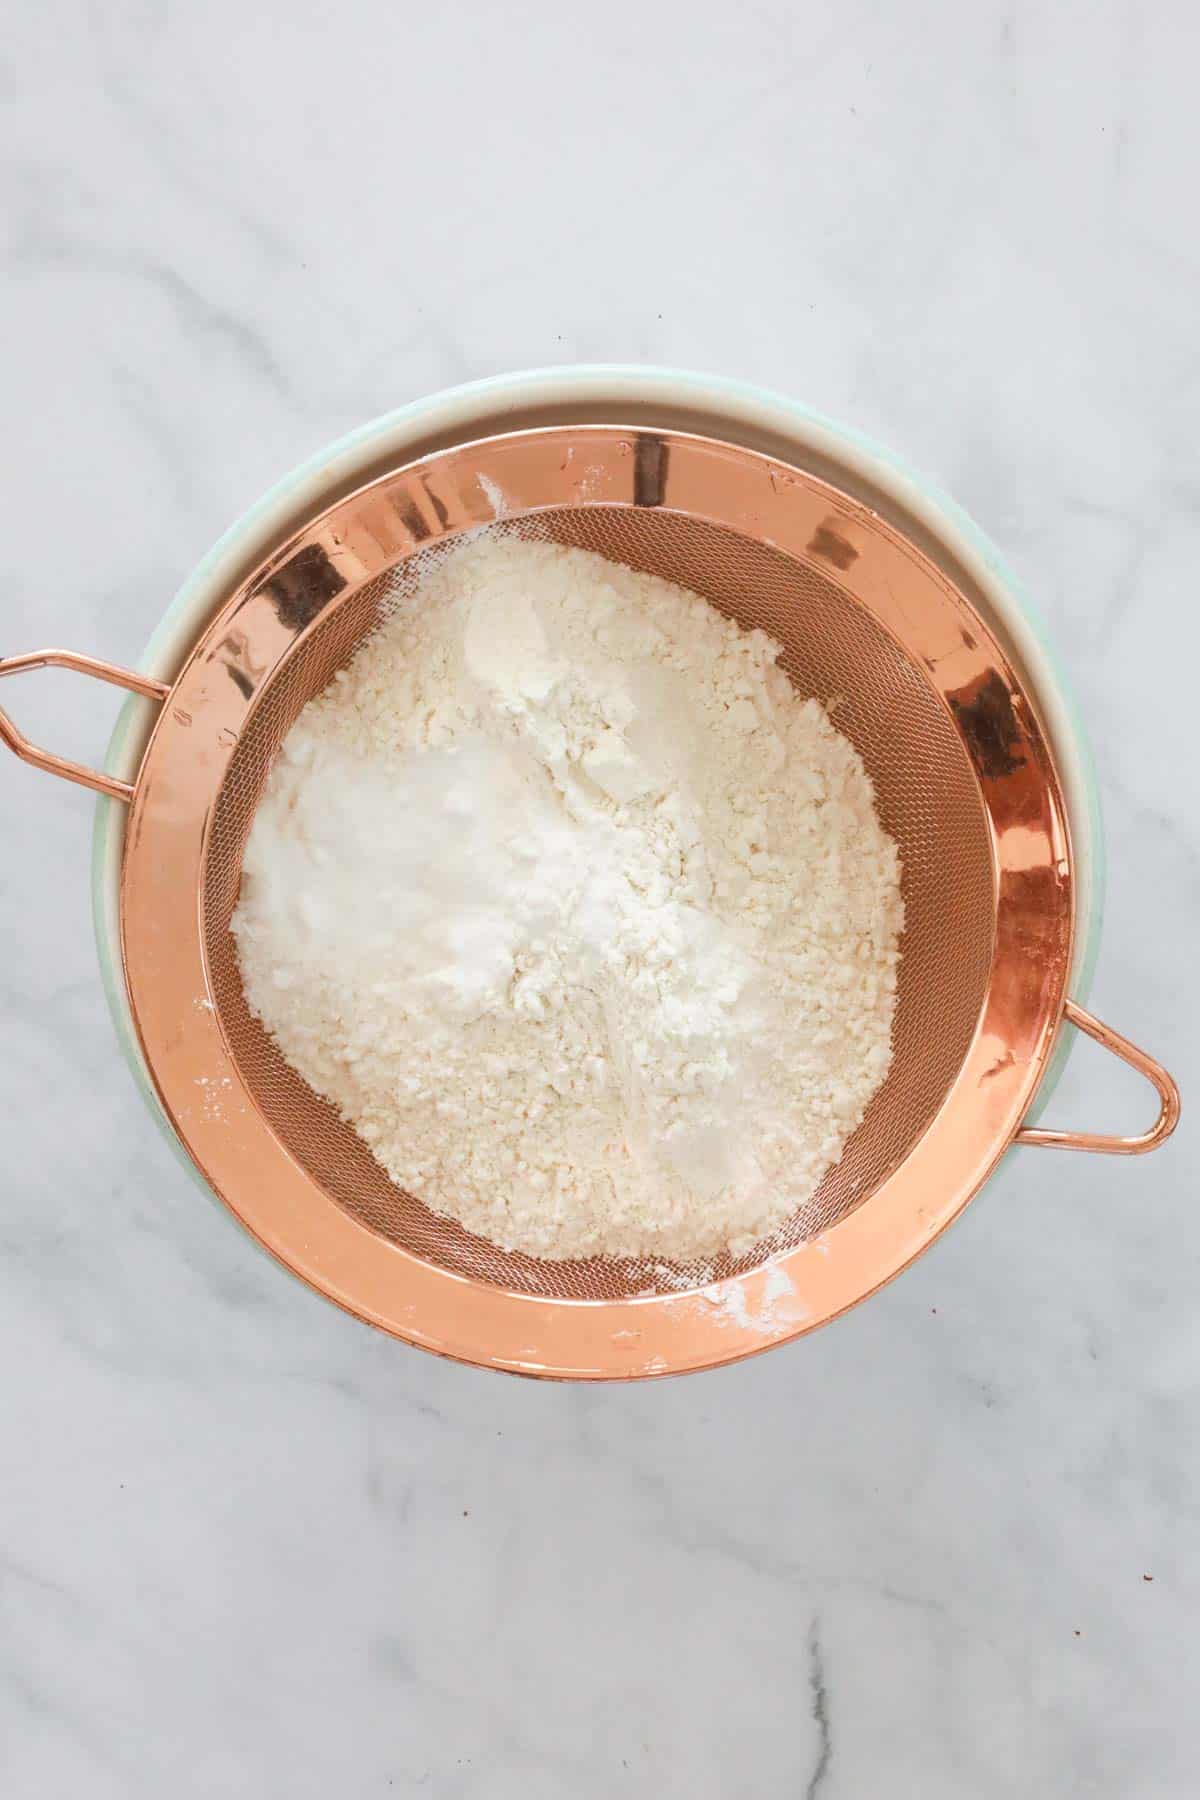 Flour and bicarb soda in a copper sieve over a bowl.